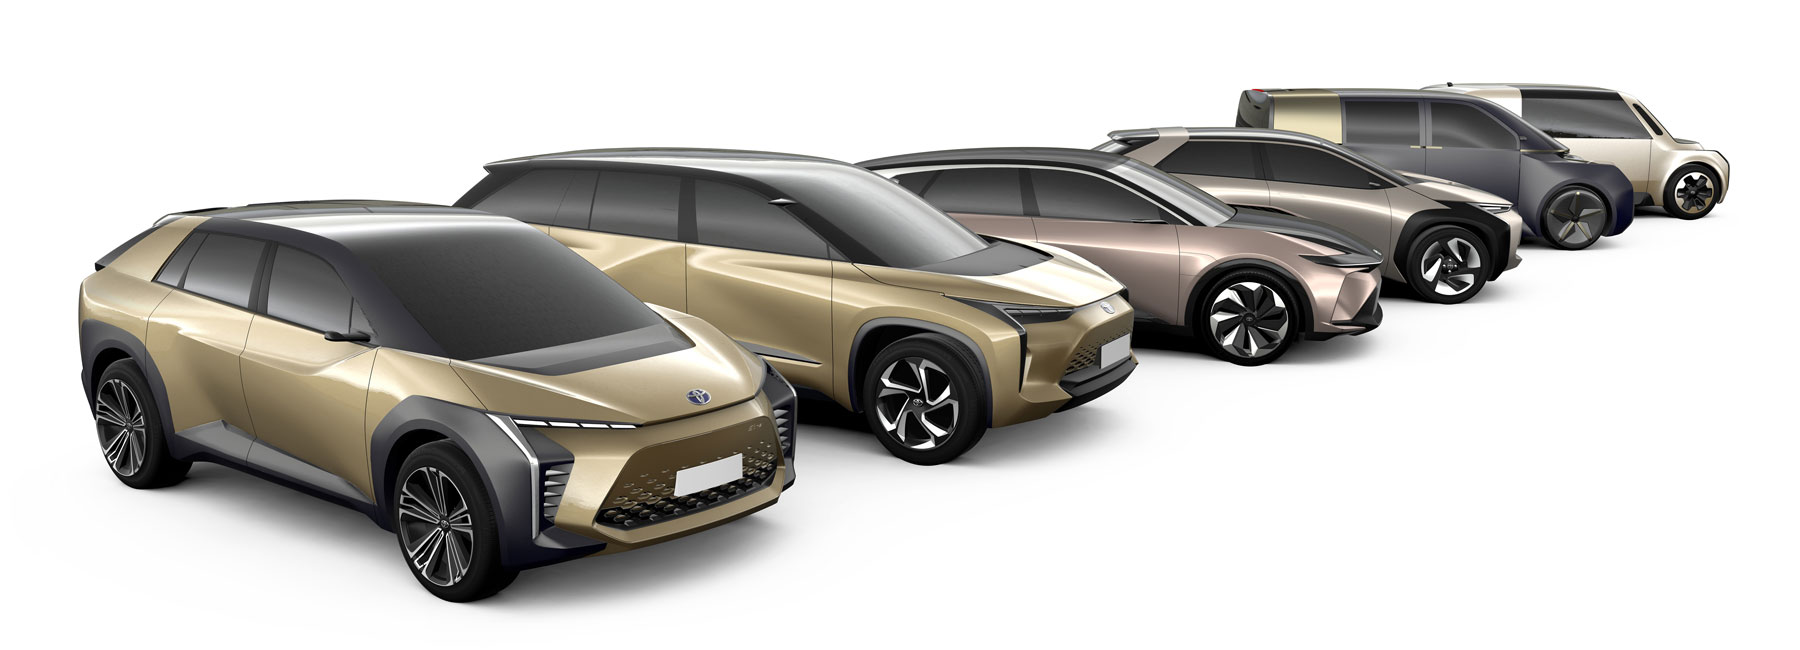 toyota details fleet of six new electric models launching for 2020-2025